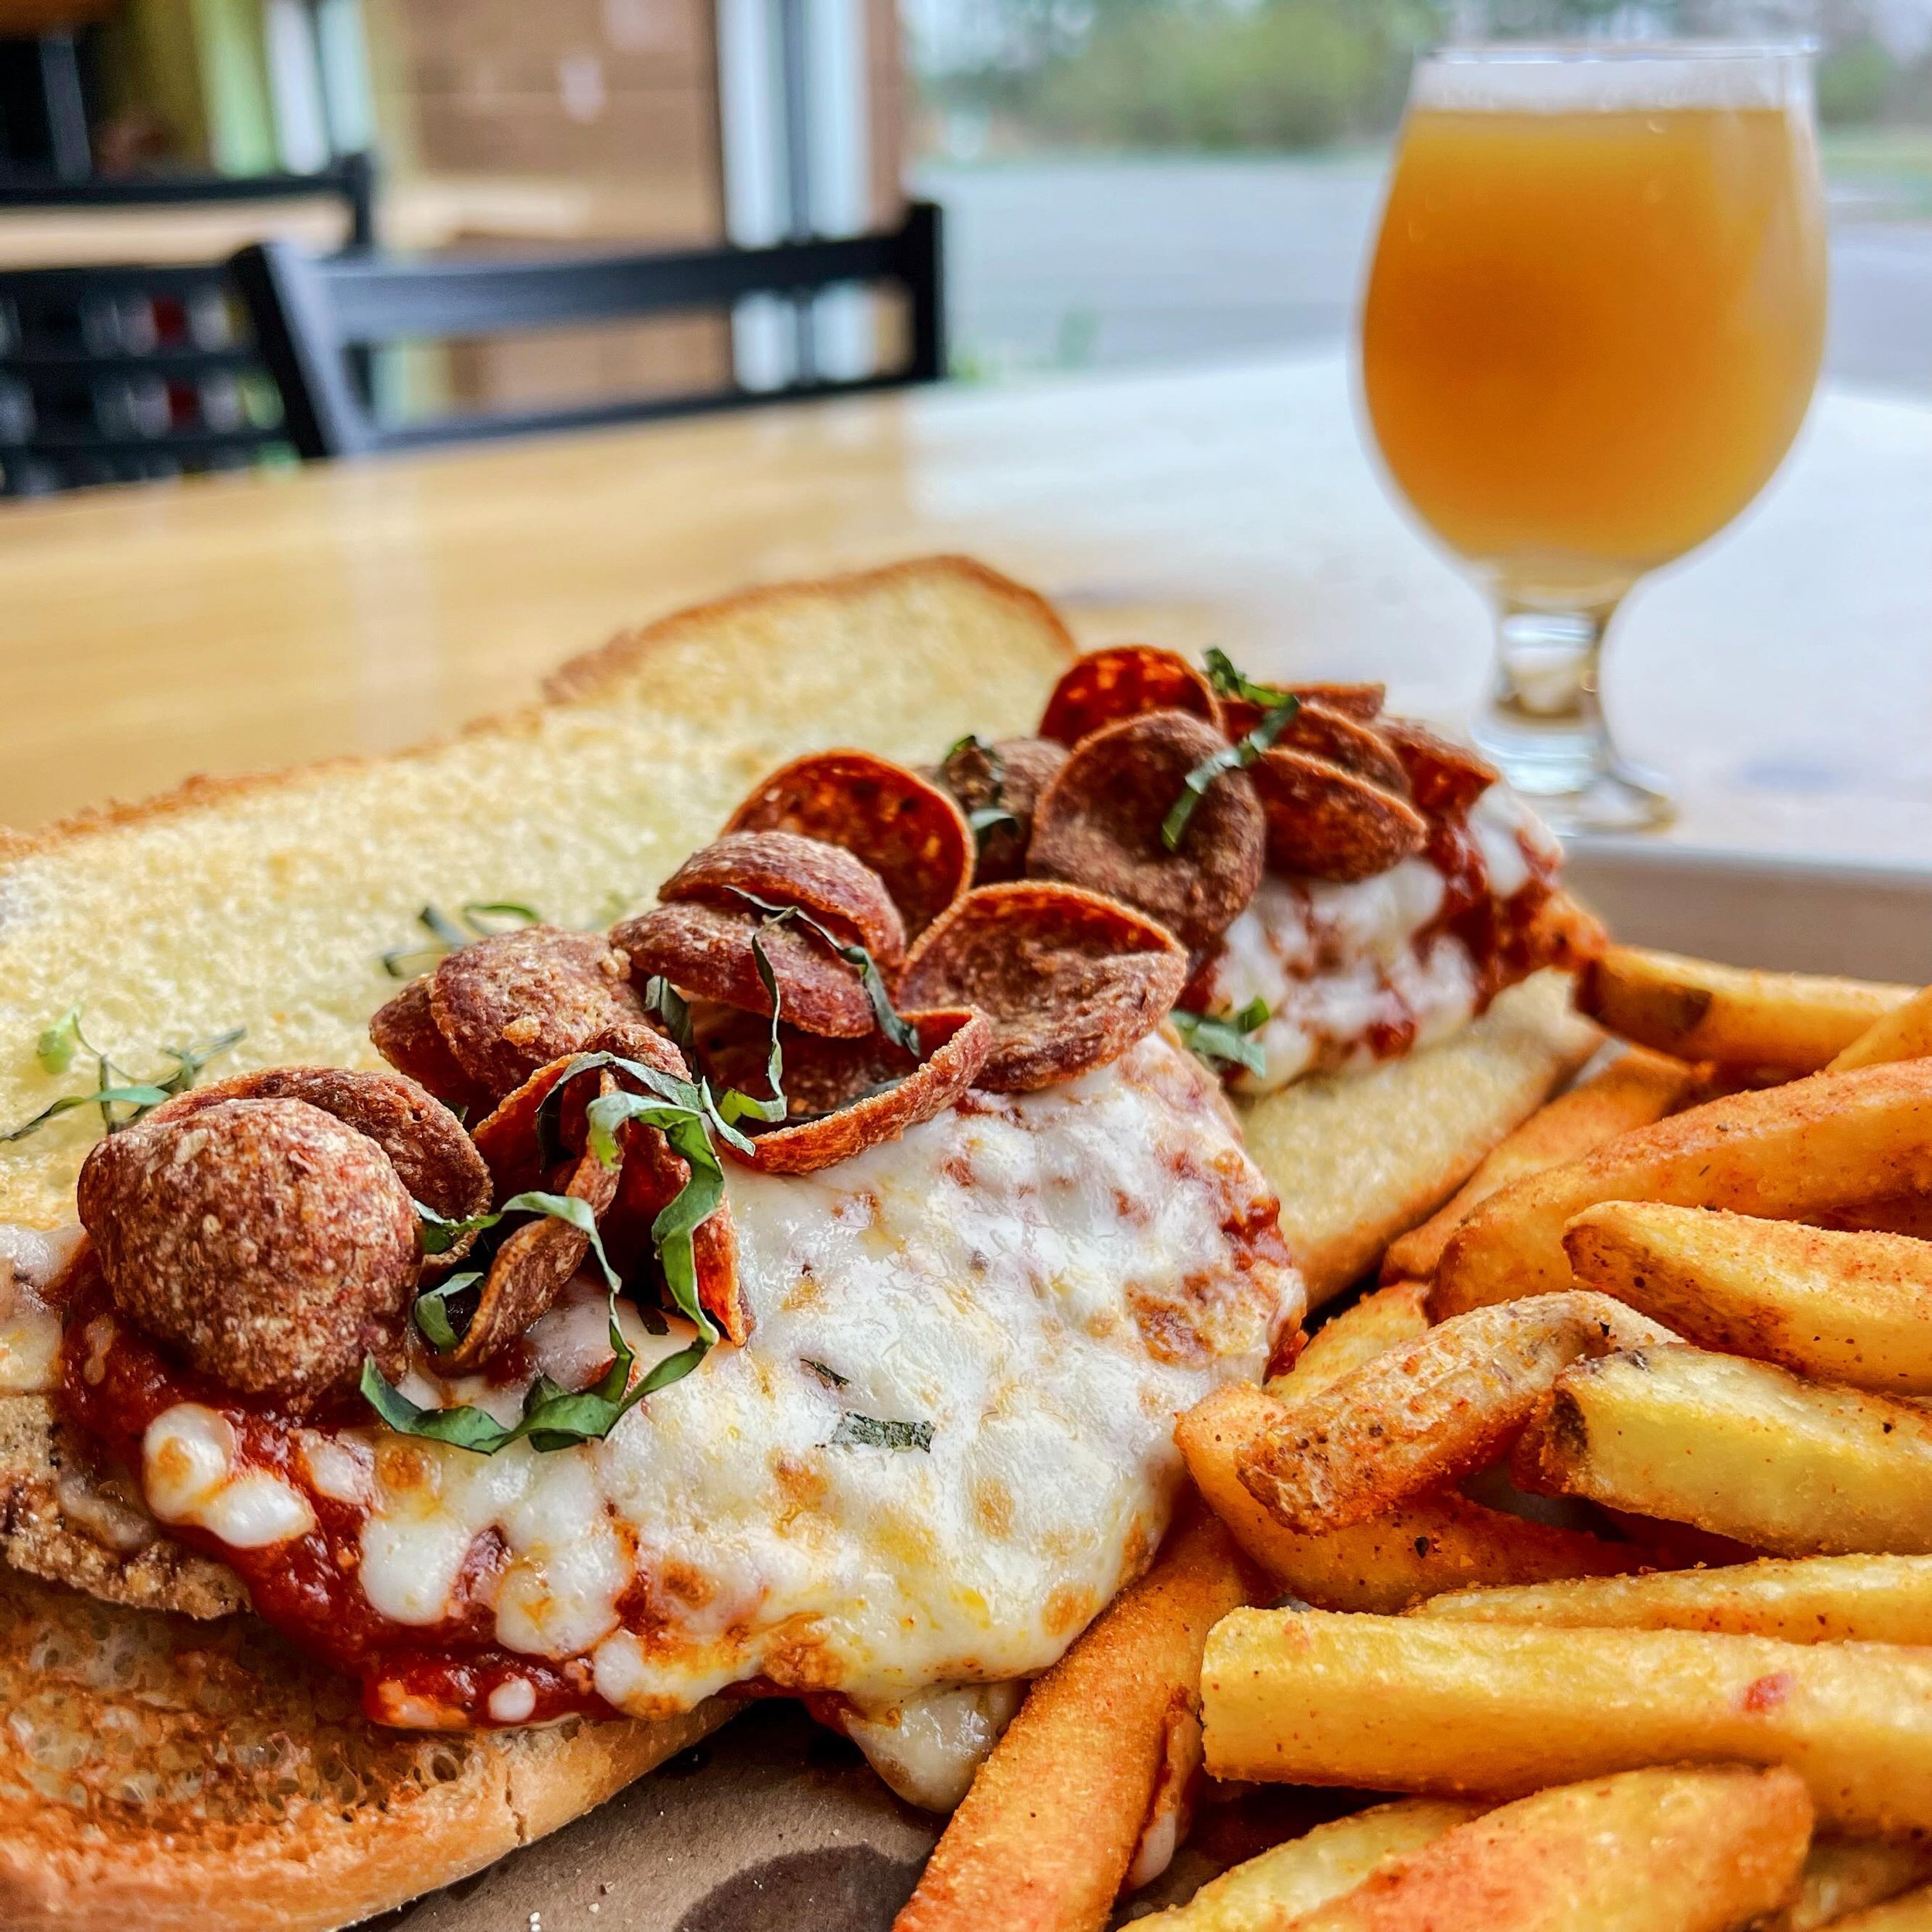 Chicken Parm-tastic!

Chicken Parm Subs! 
Breaded chicken cutlets, marinara, mozzarella, basil, crispy pepperoni on garlic bread $17

🍺 Chef Special comes with a $4 pint of your choice! 
We recommend - State Machine DDH Citra!
Grab it in its freshes